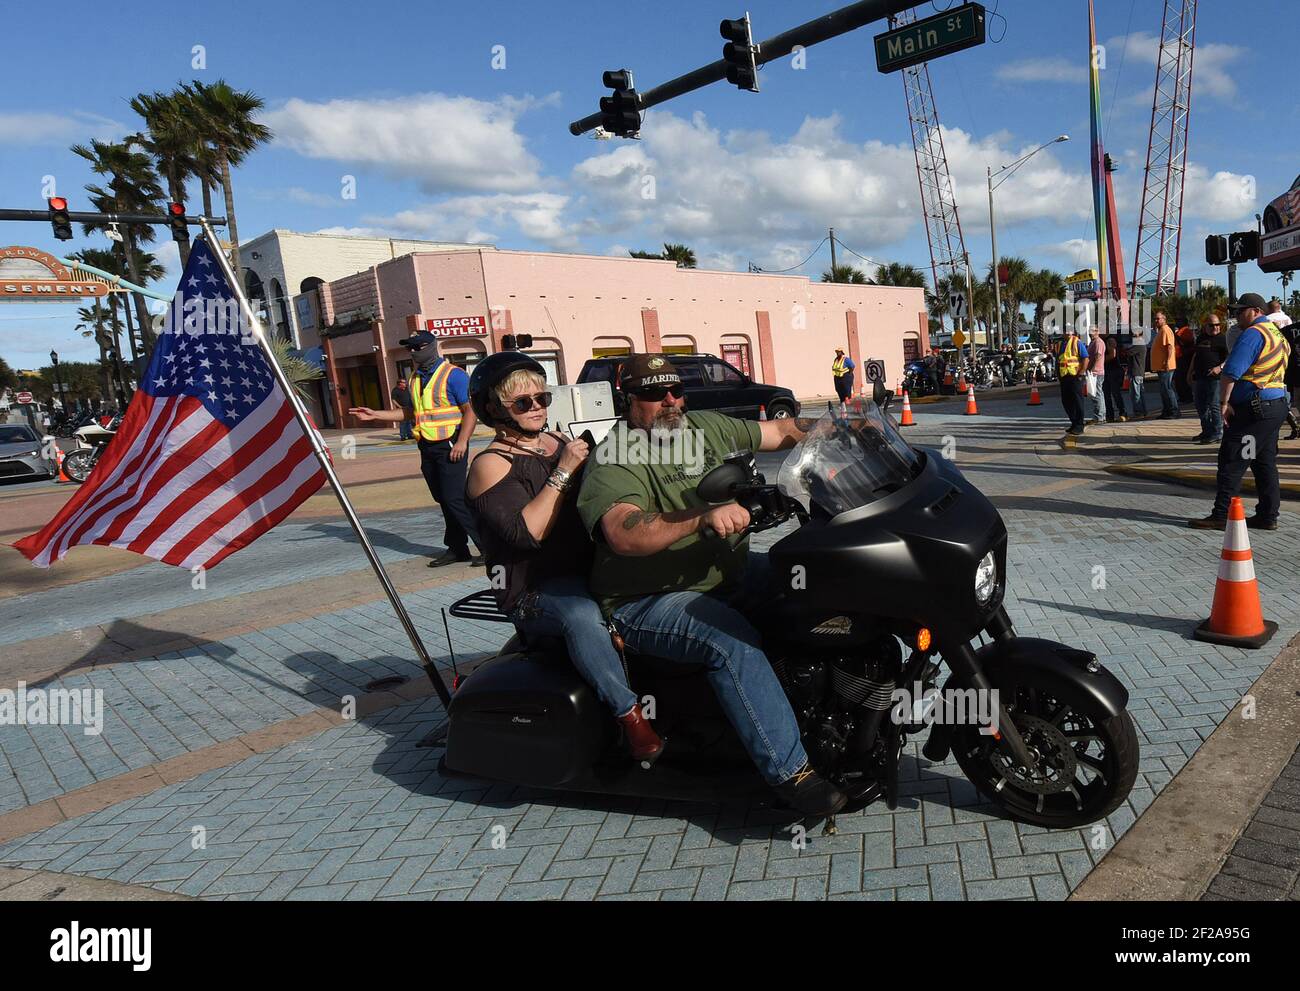 Daytona Beach, United States. 10th Mar, 2021. A motorcyclist carries an American flag as he rides down Main Street during the 80th year of Daytona Beach's annual Bike Week event. Few people were seen wearing face masks or practicing social distancing and some worry the gathering could become a superspreader event as the coronavirus pandemic continues. Credit: SOPA Images Limited/Alamy Live News Stock Photo